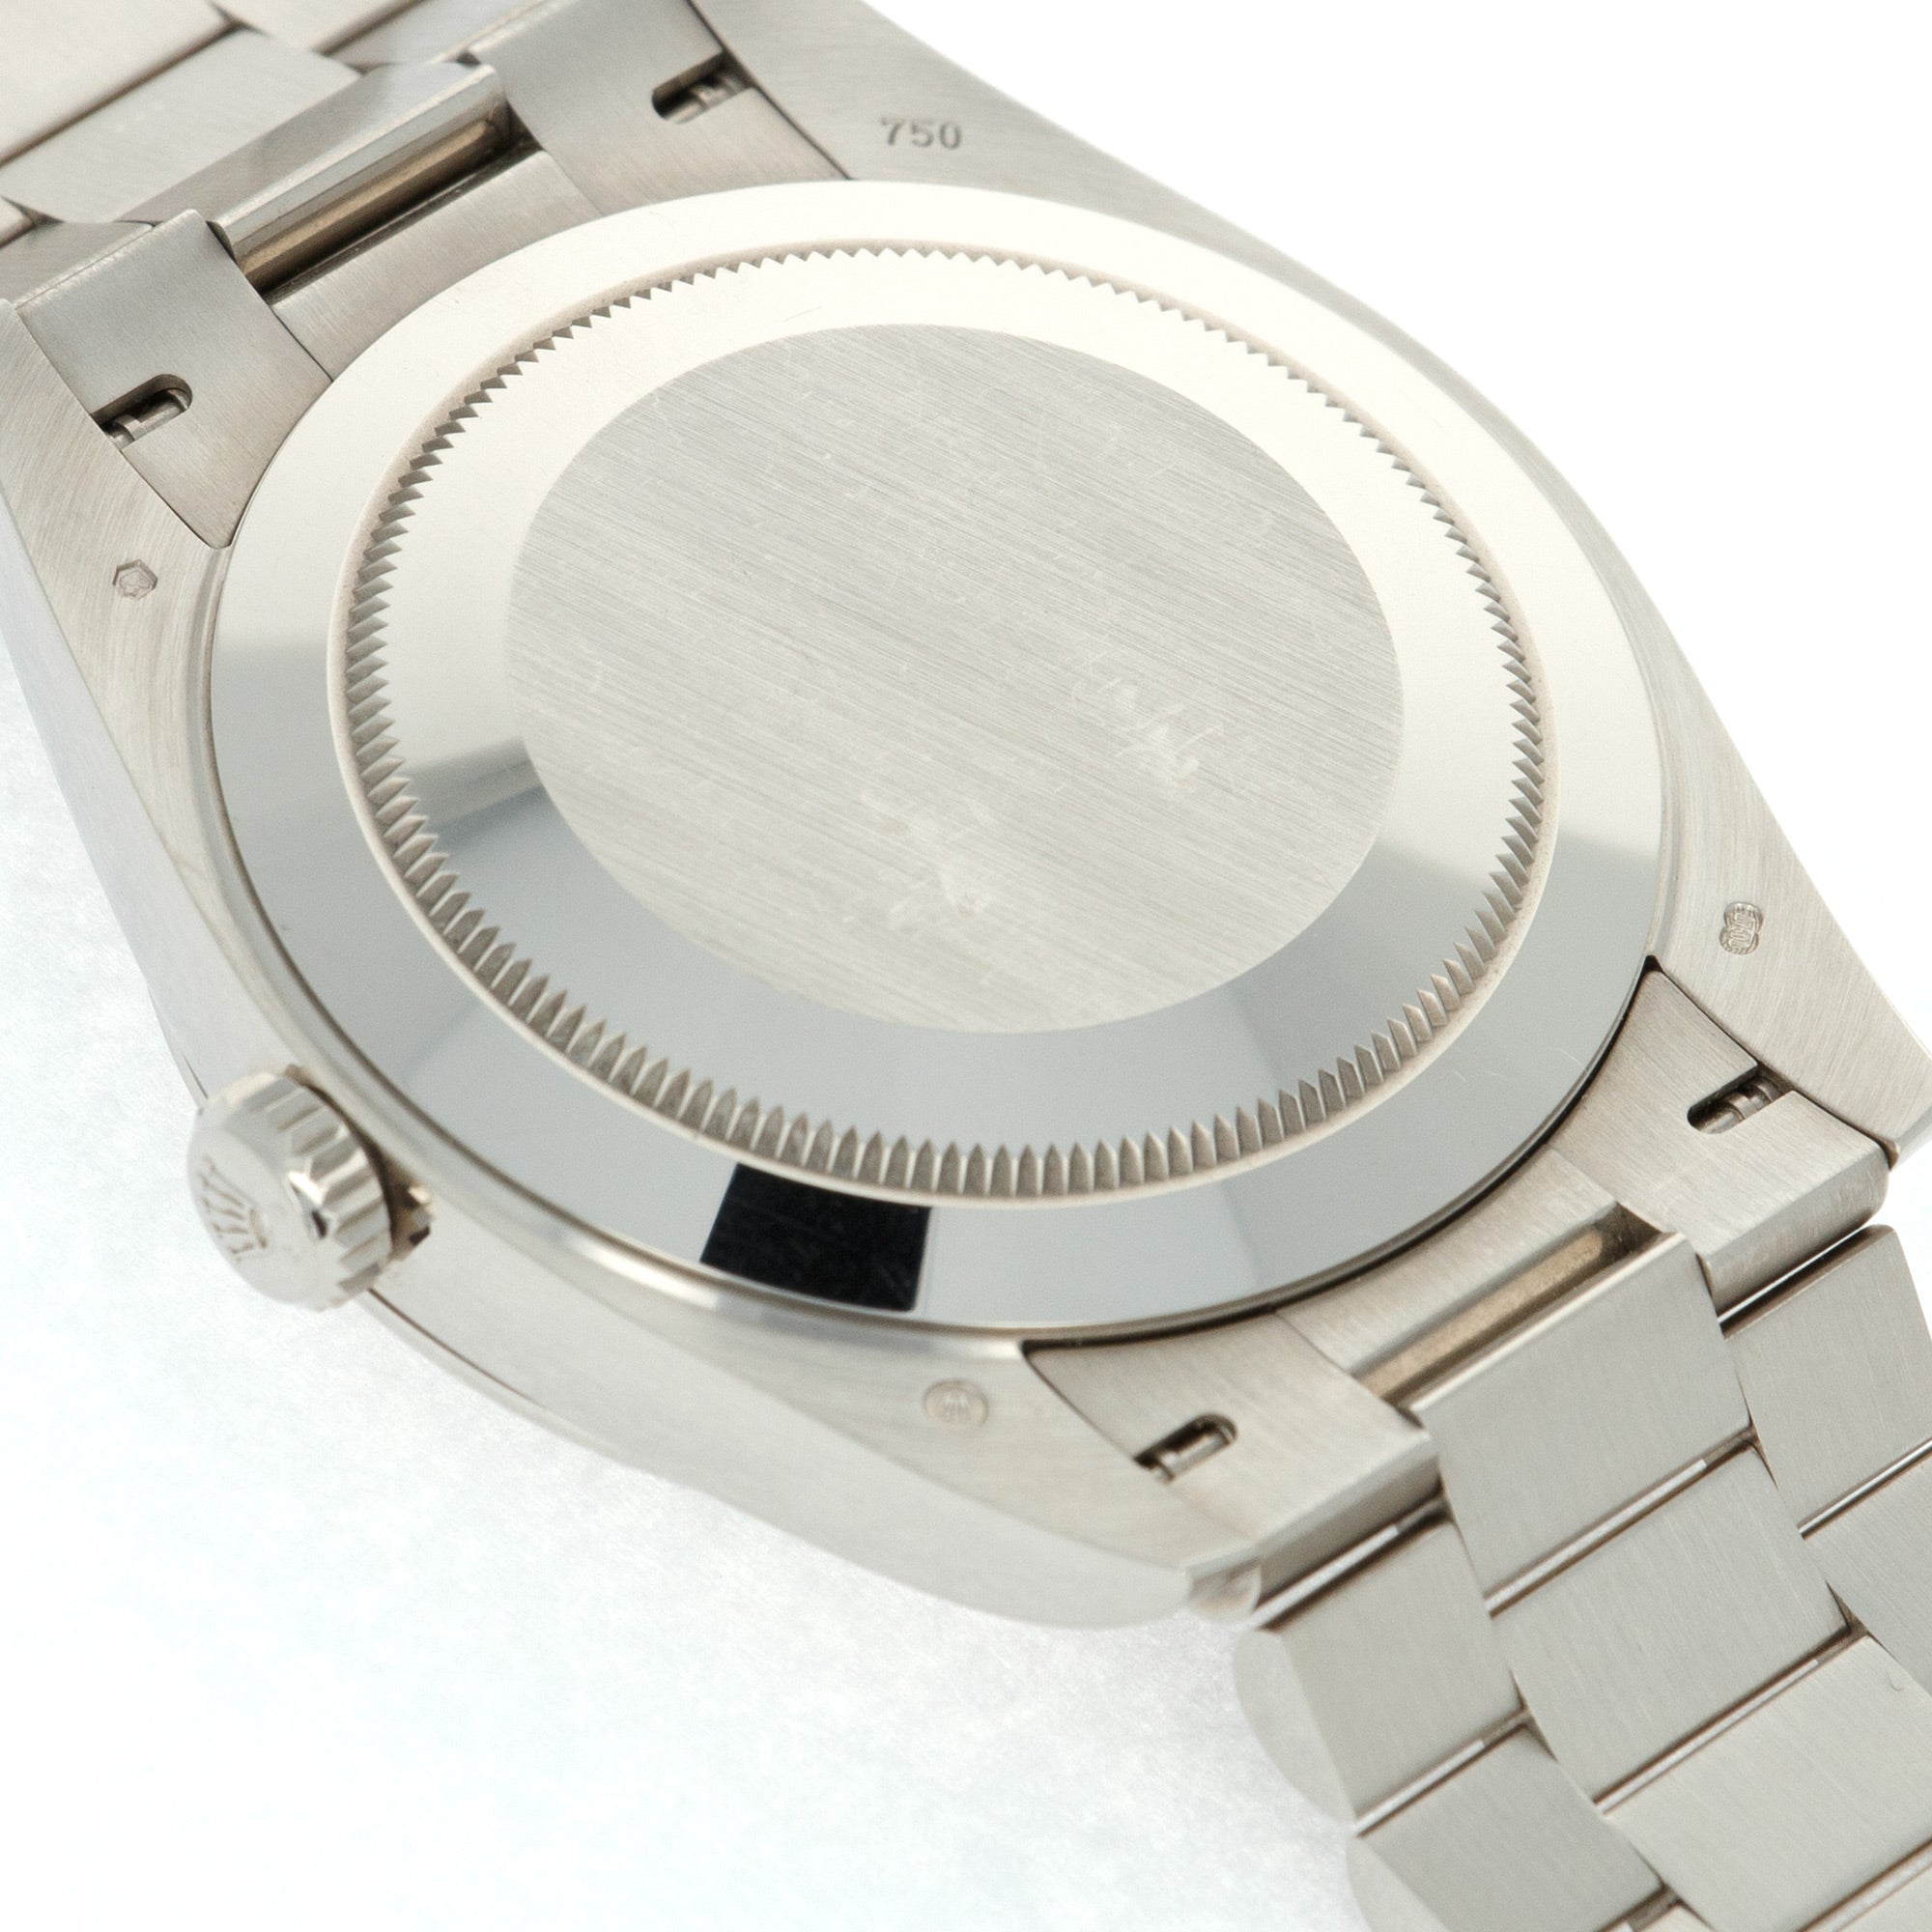 Rolex - Rolex White Gold Day-Date Ref. 228239 with Factory Baguette Diamond Dial - The Keystone Watches